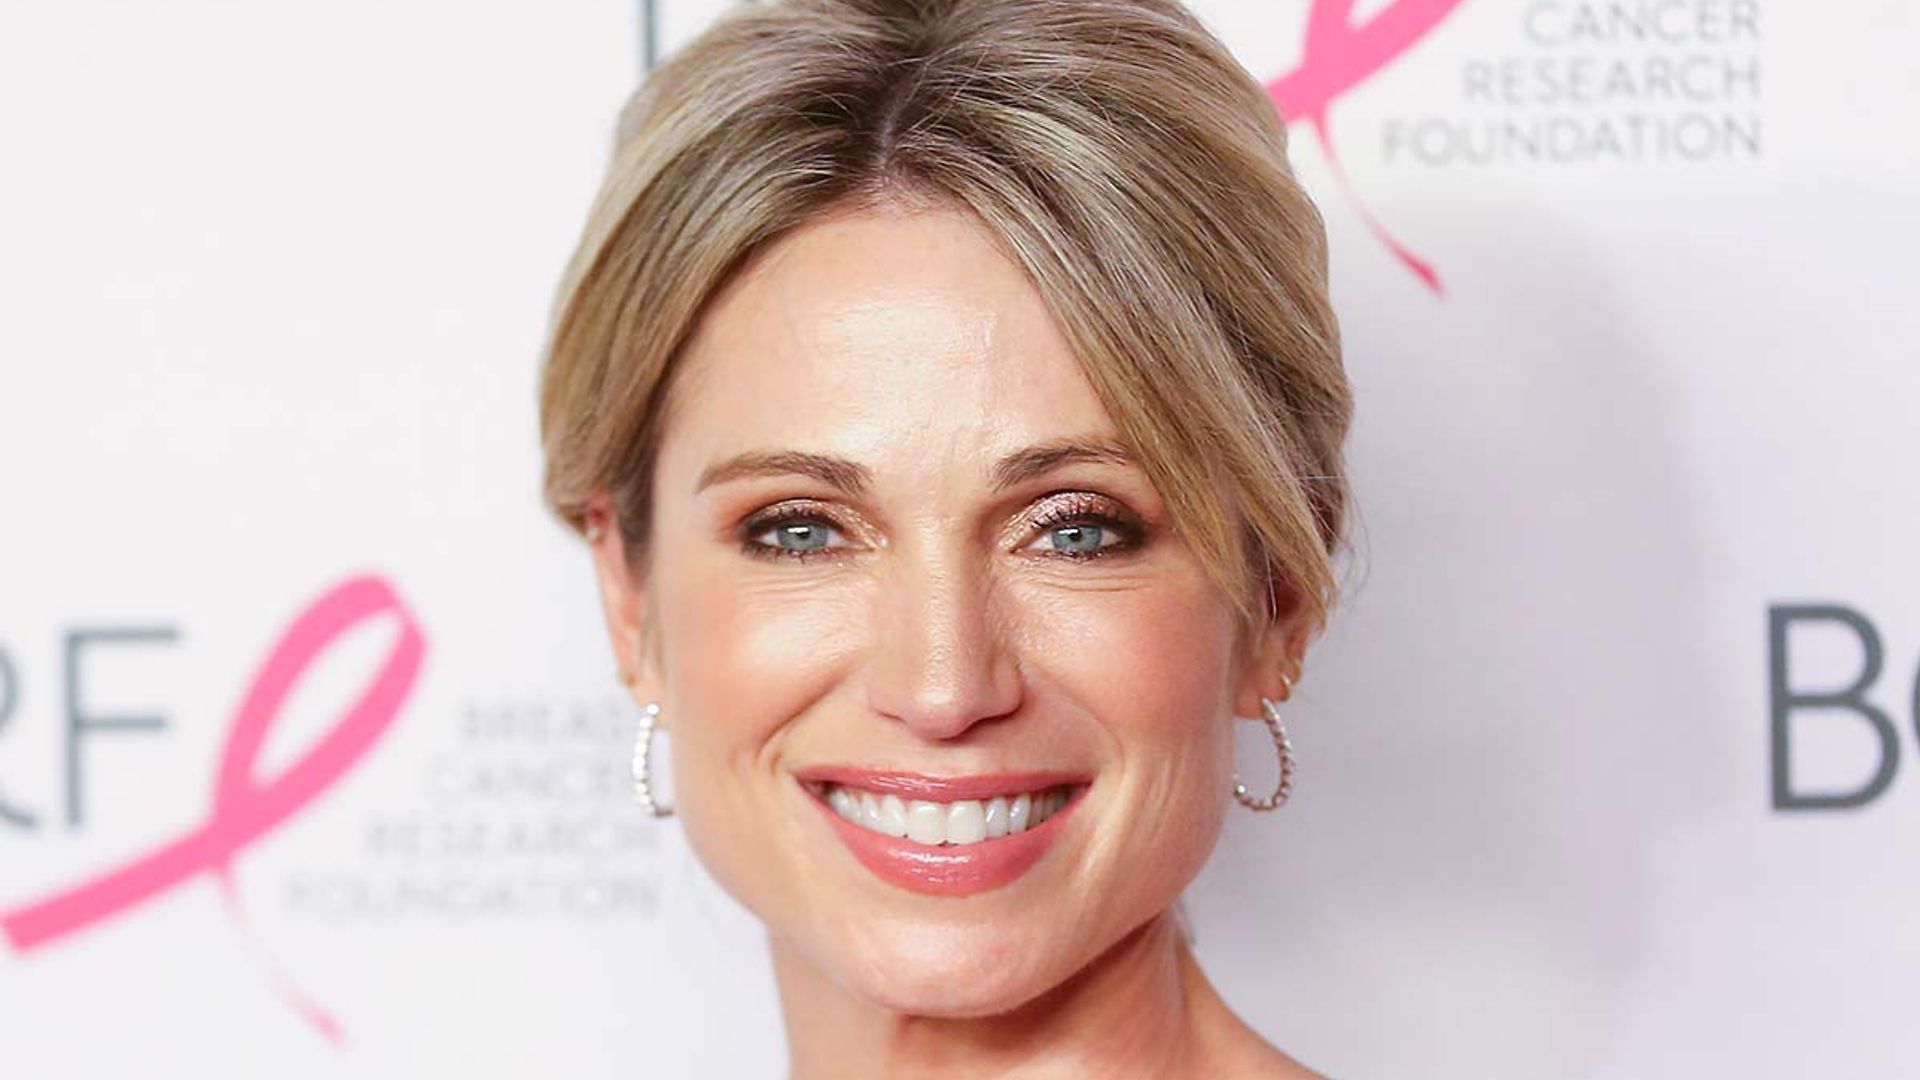 GMA's Amy Robach wows in figure-hugging skirt and dazzling jewels